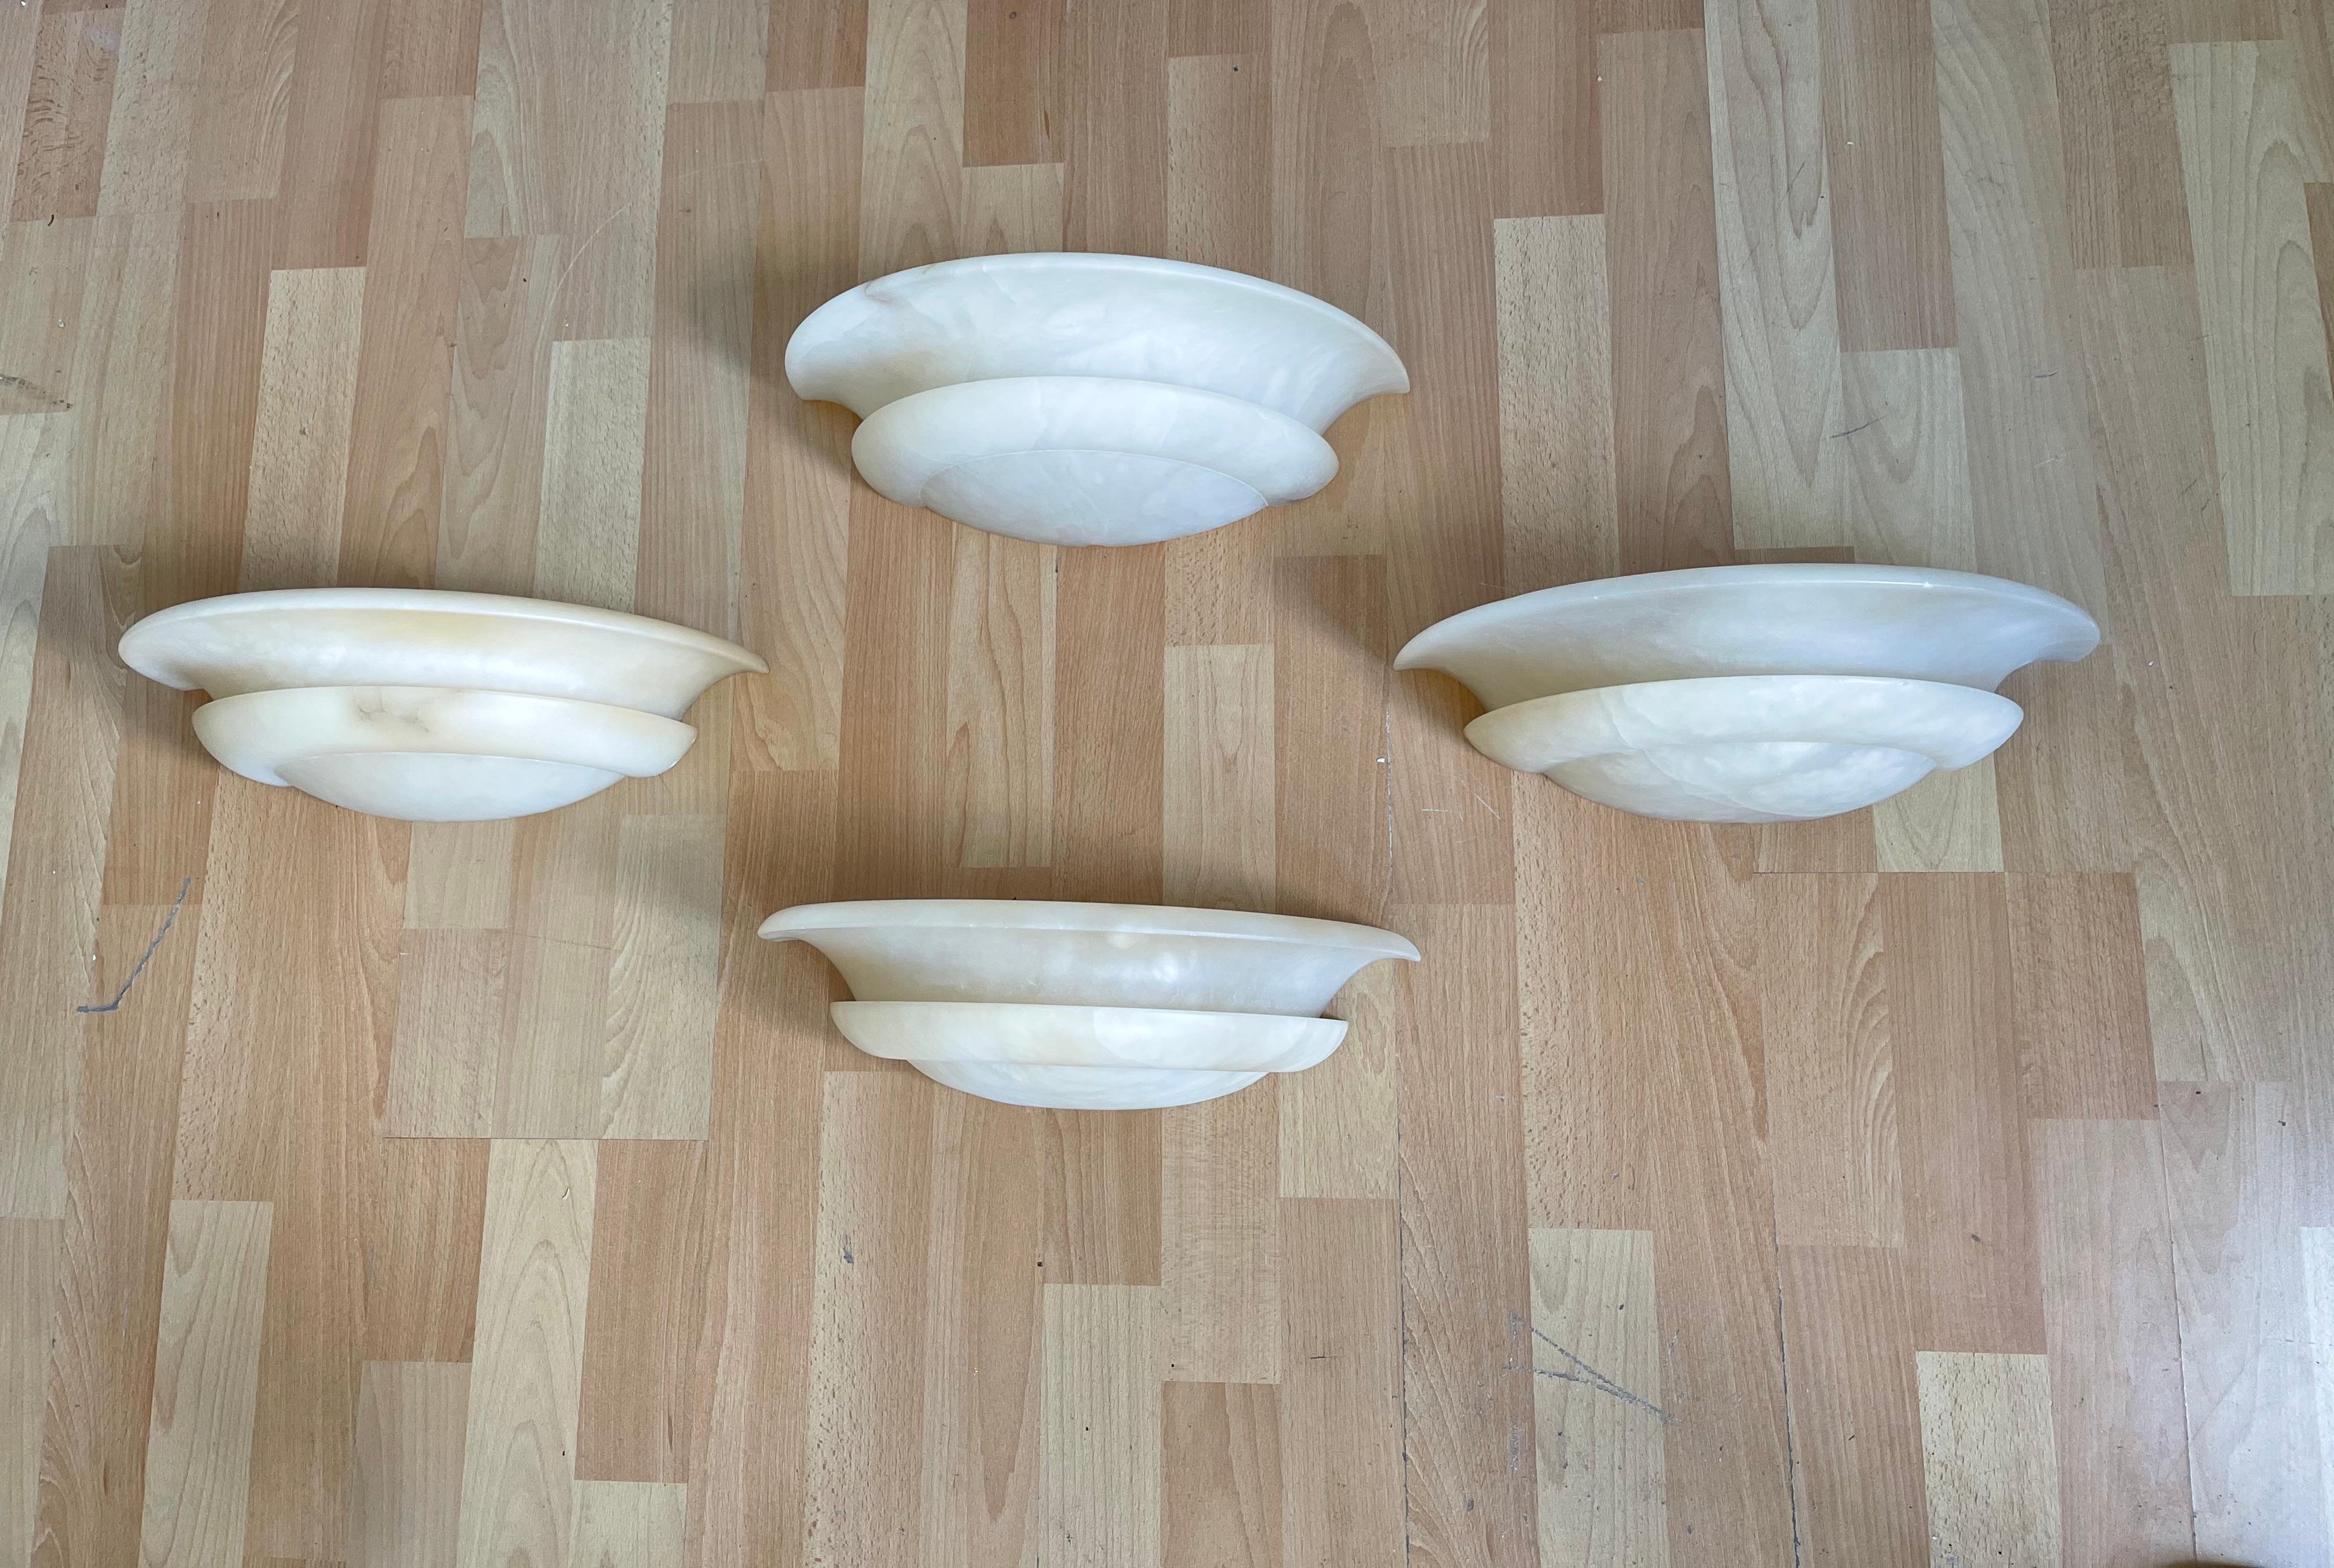 Wonderful shape, perfect size and excellent condition alabaster sconces.

This excellent condition set of four of alabaster light fixtures for wall mounting will look great no matter where you decide to use them. These shades are all handmade out of